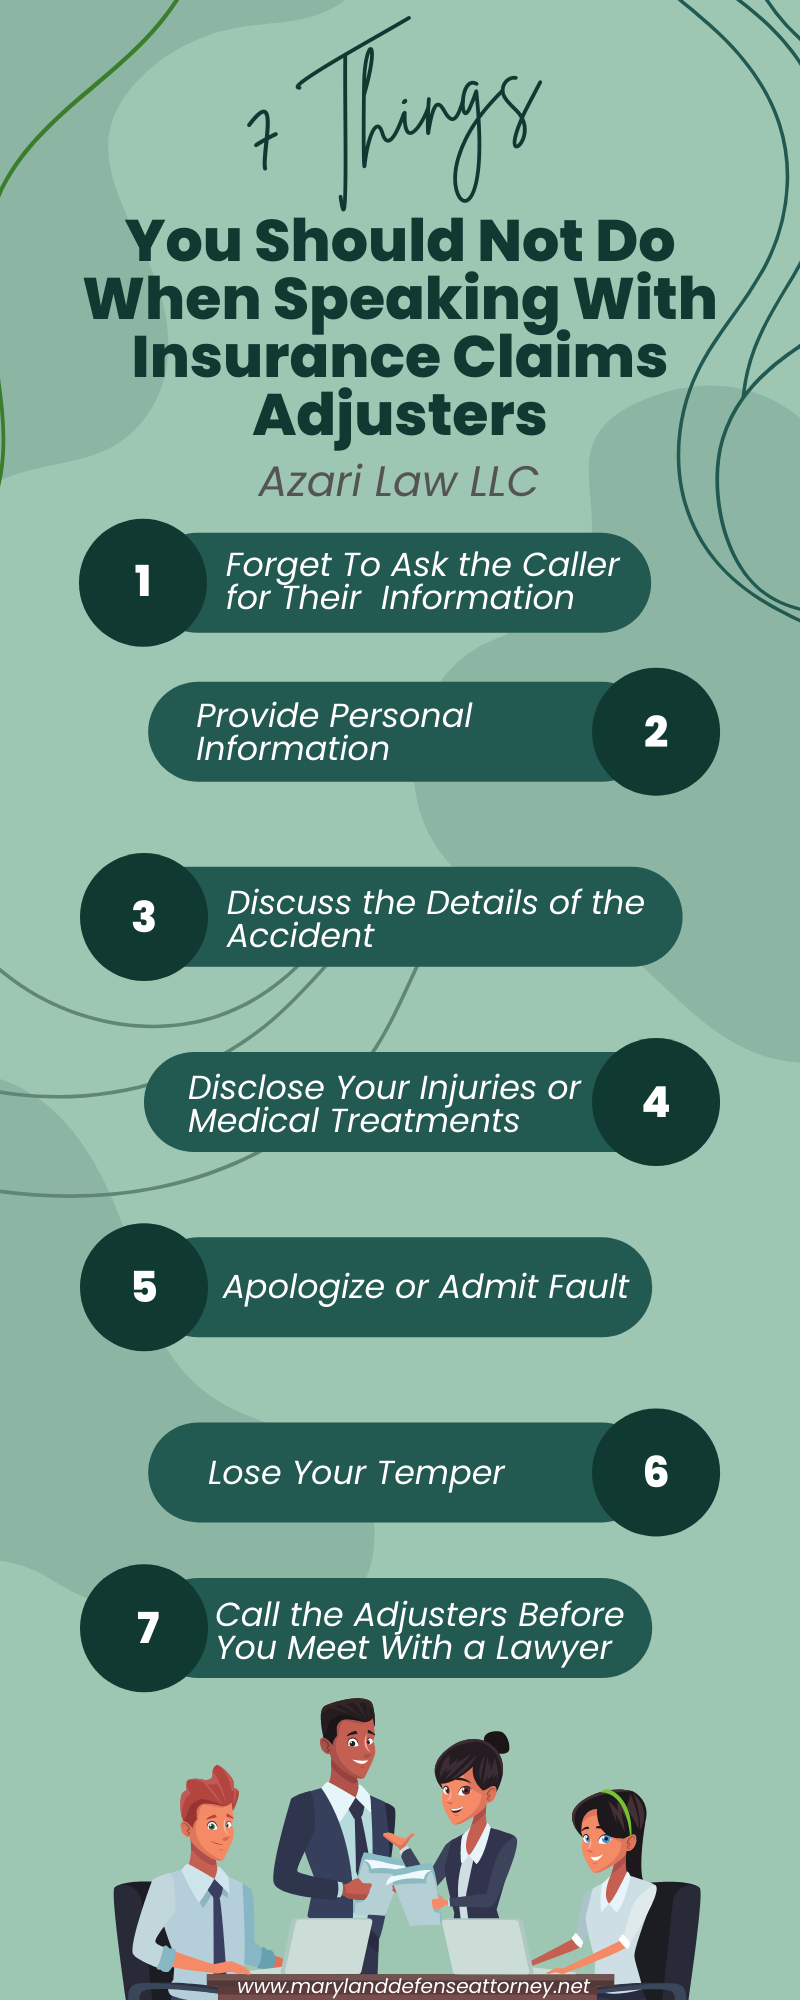 7 Things You Should Not Do When Speaking With Insurance Claims Adjusters Infographic